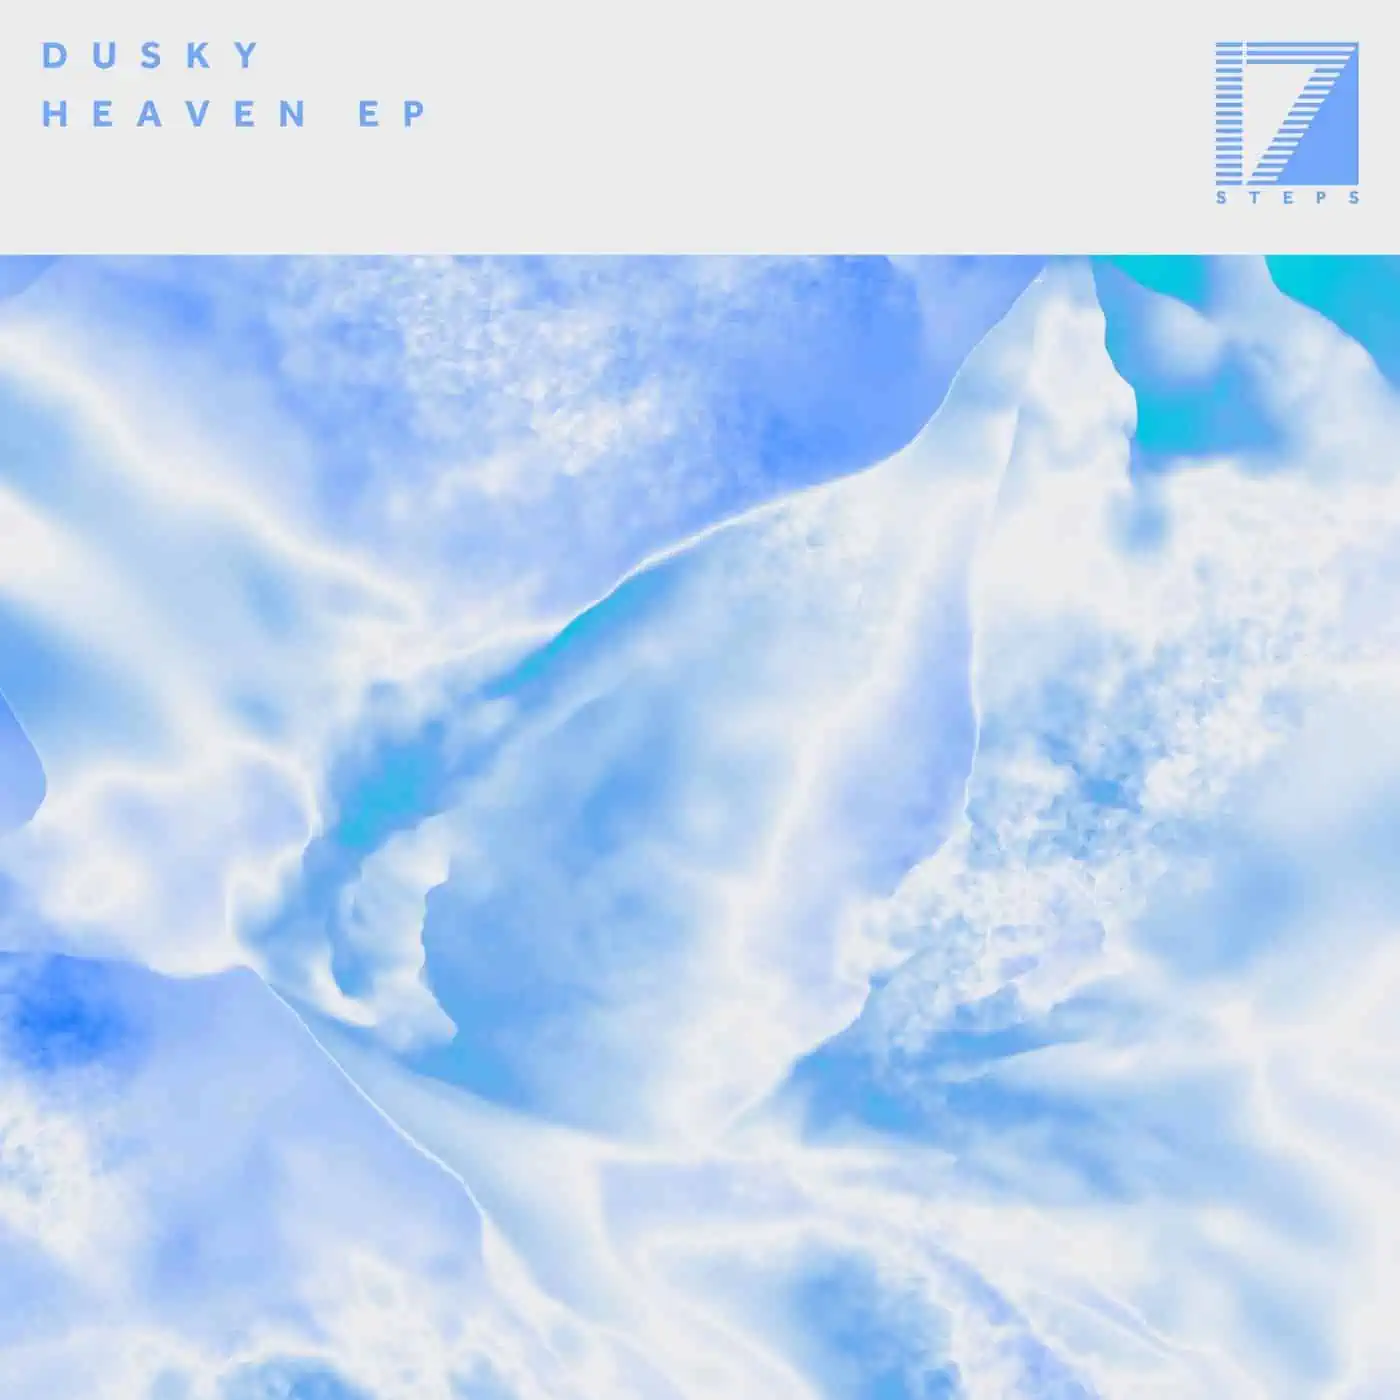 image cover: Heaven EP by Dusky on 17 Steps